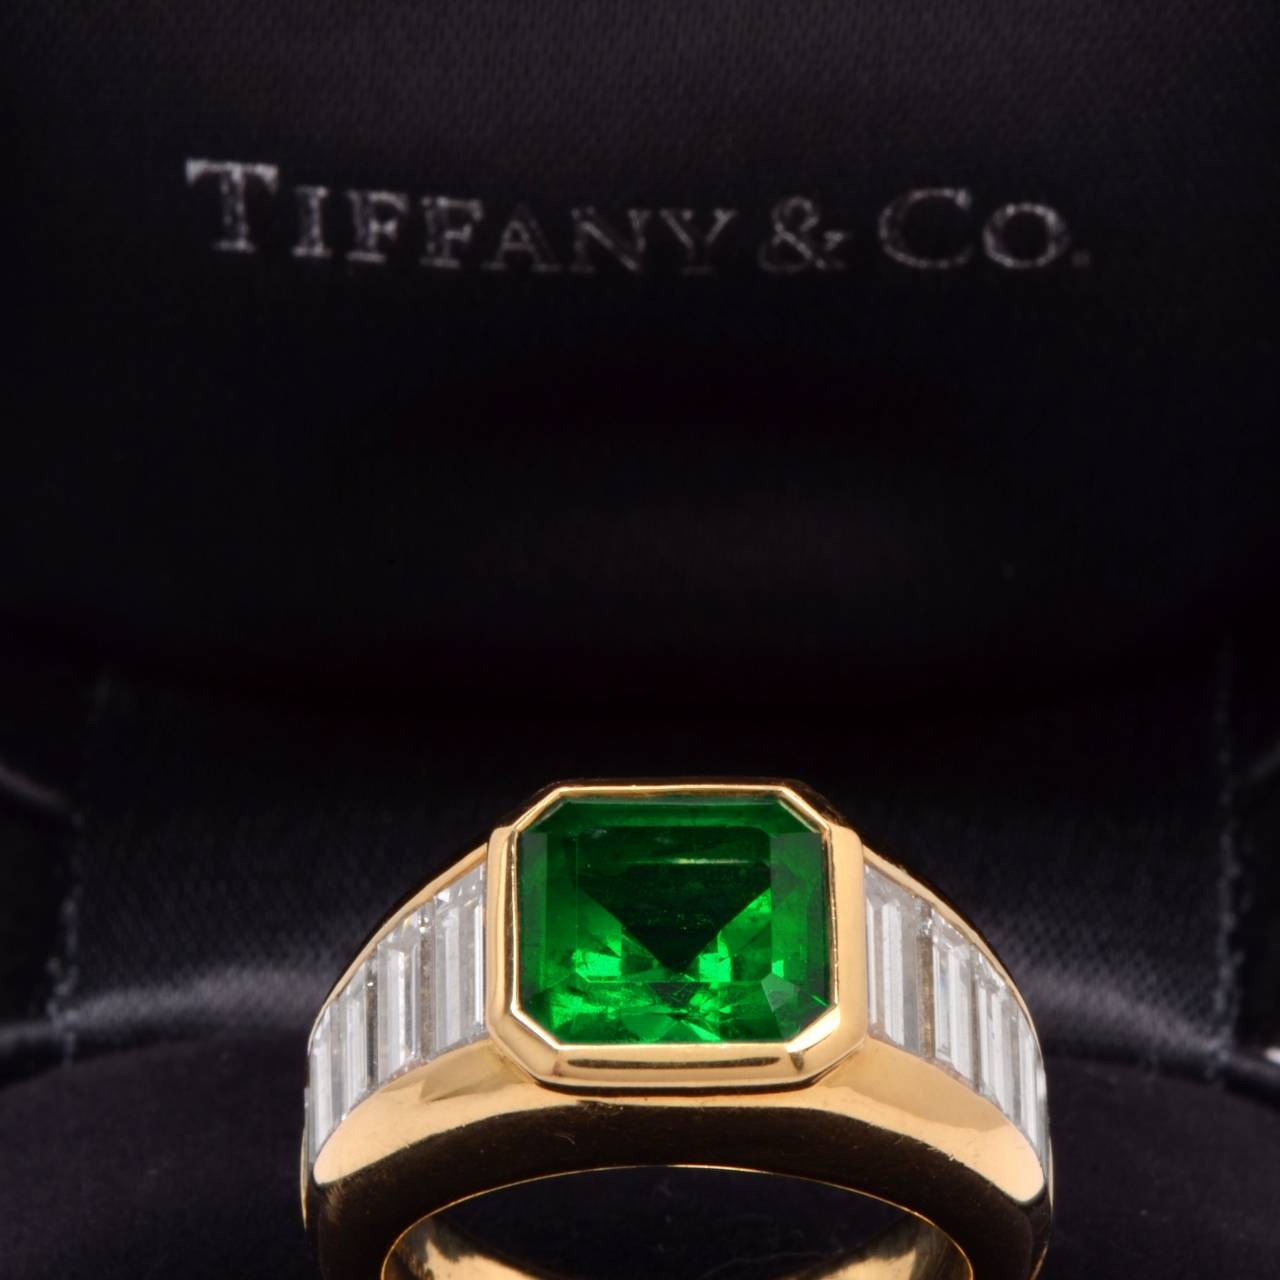 Tiffany & Co. GIA Certified Emerald Baguette Diamond Gold Ring 2